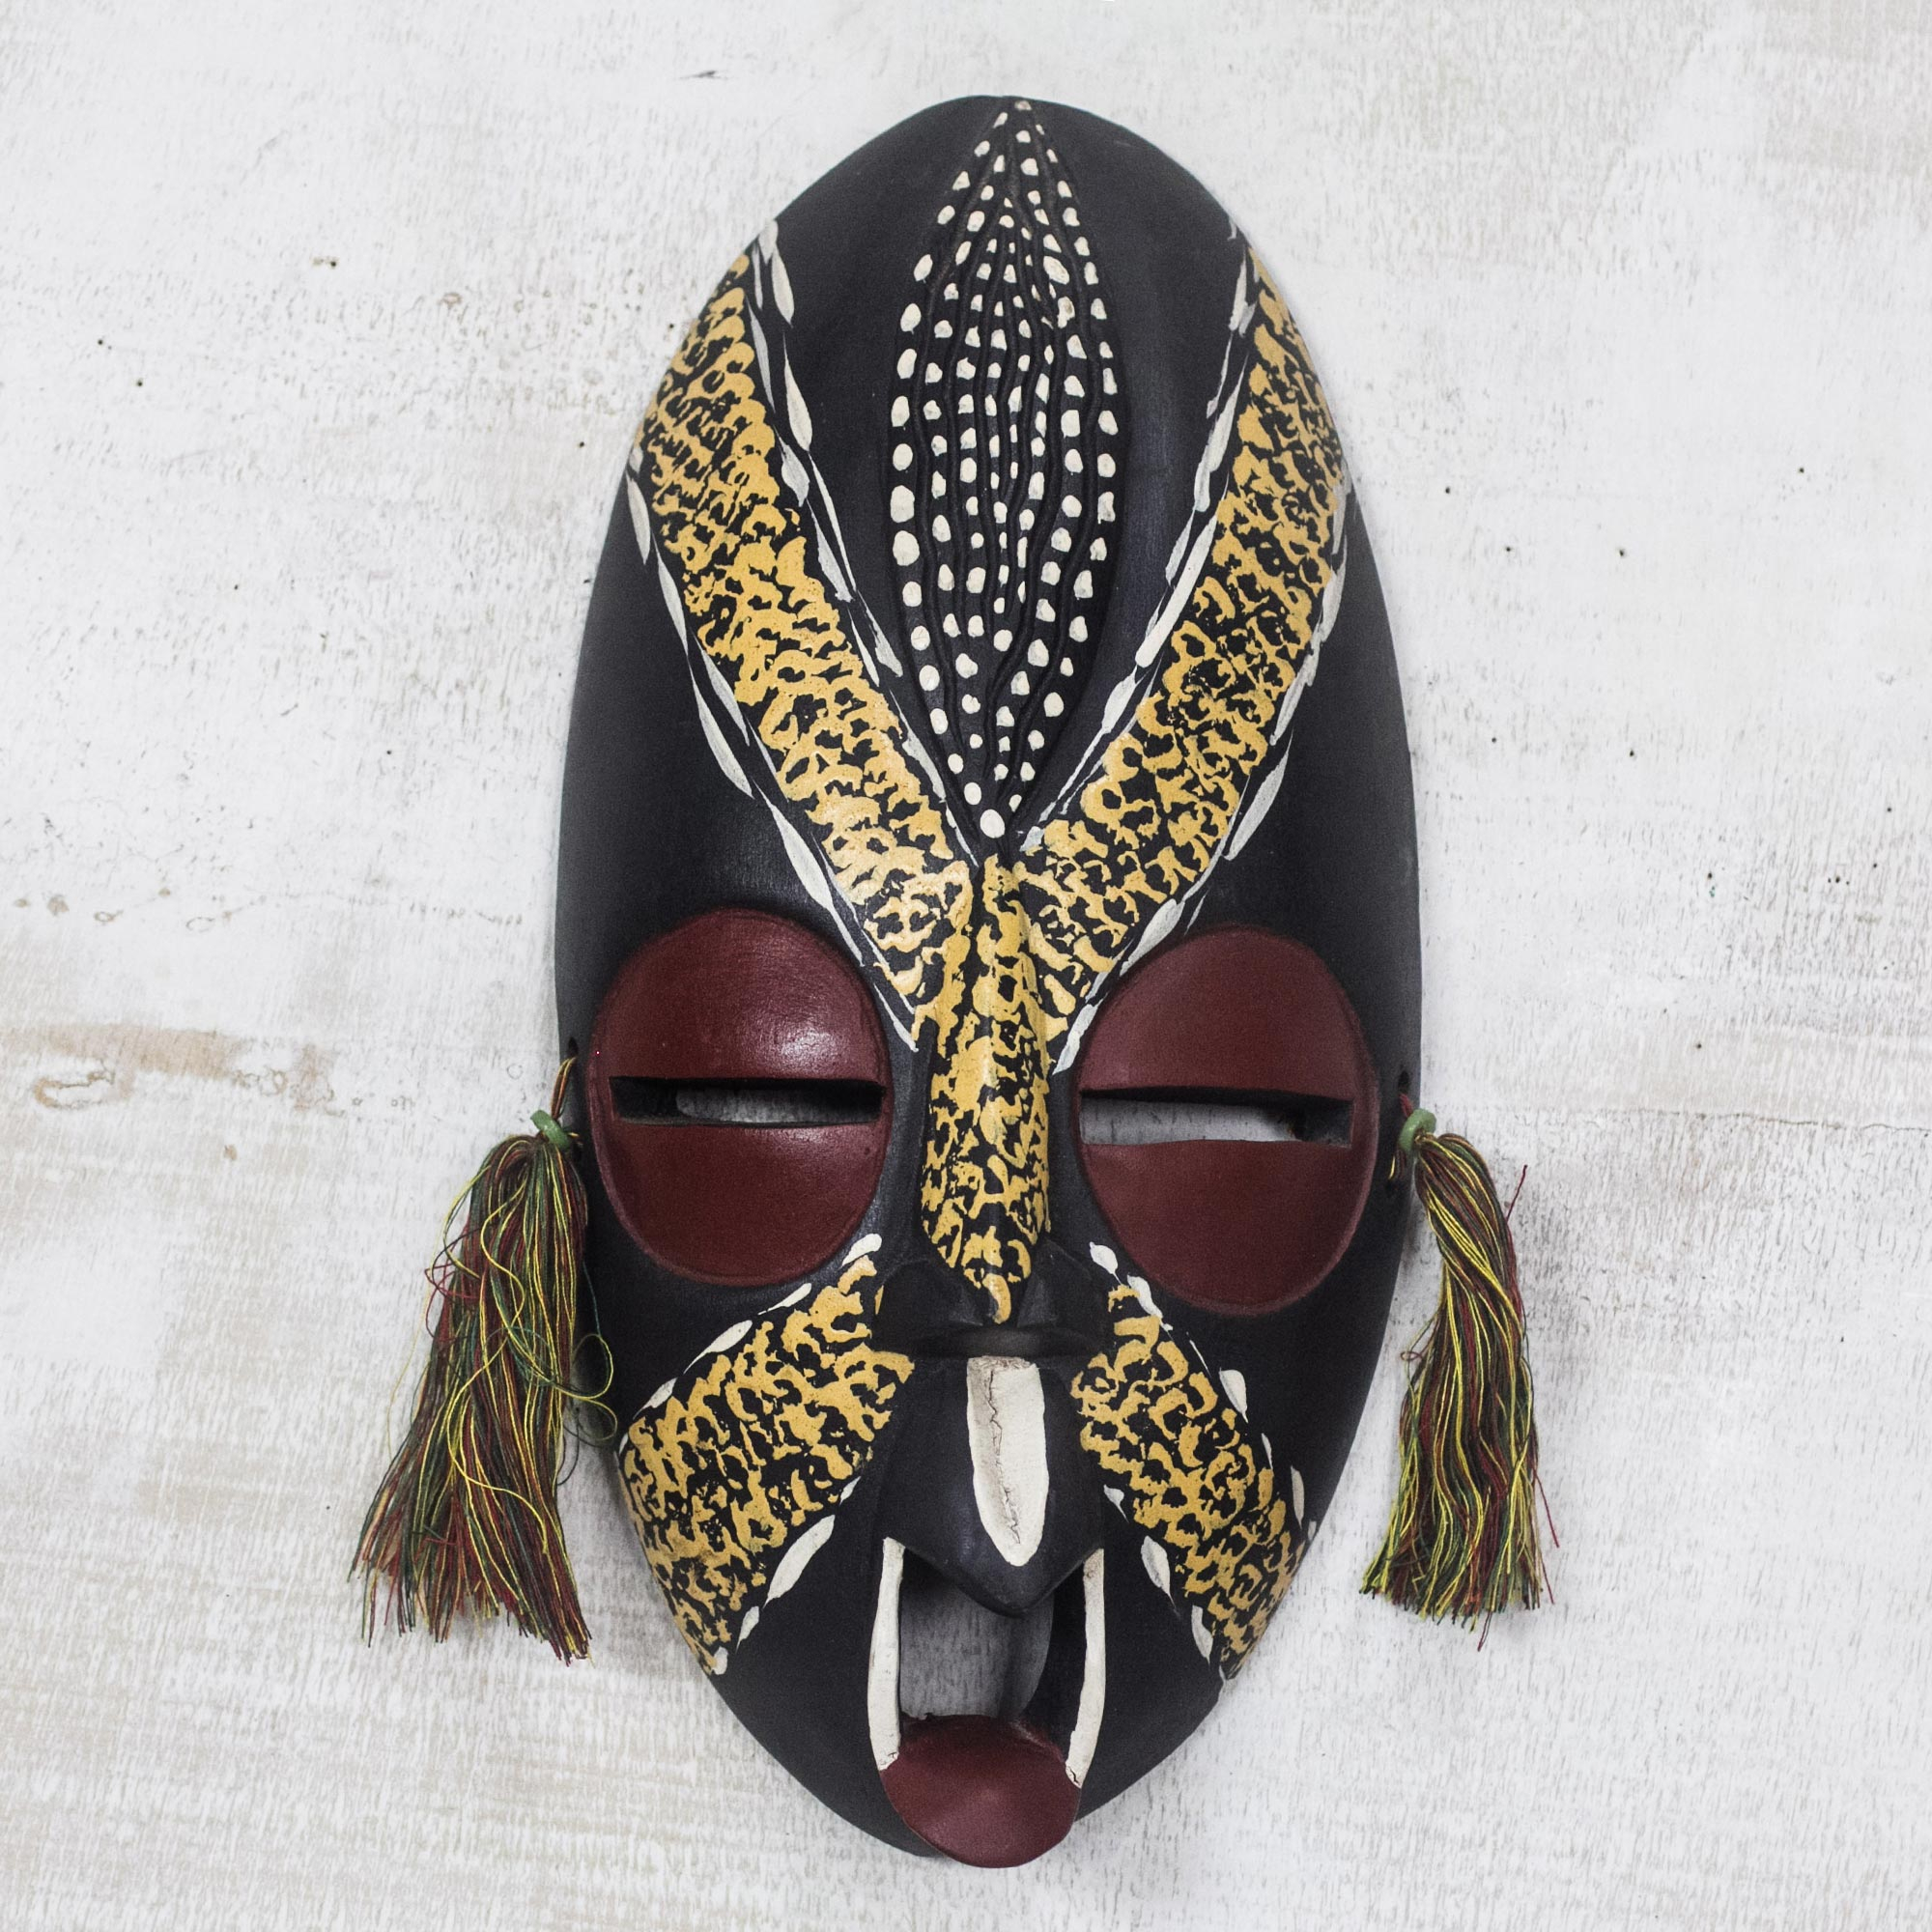 Handcrafted African Sese Wood Mask From Ghana Nyame Bekyere Novica